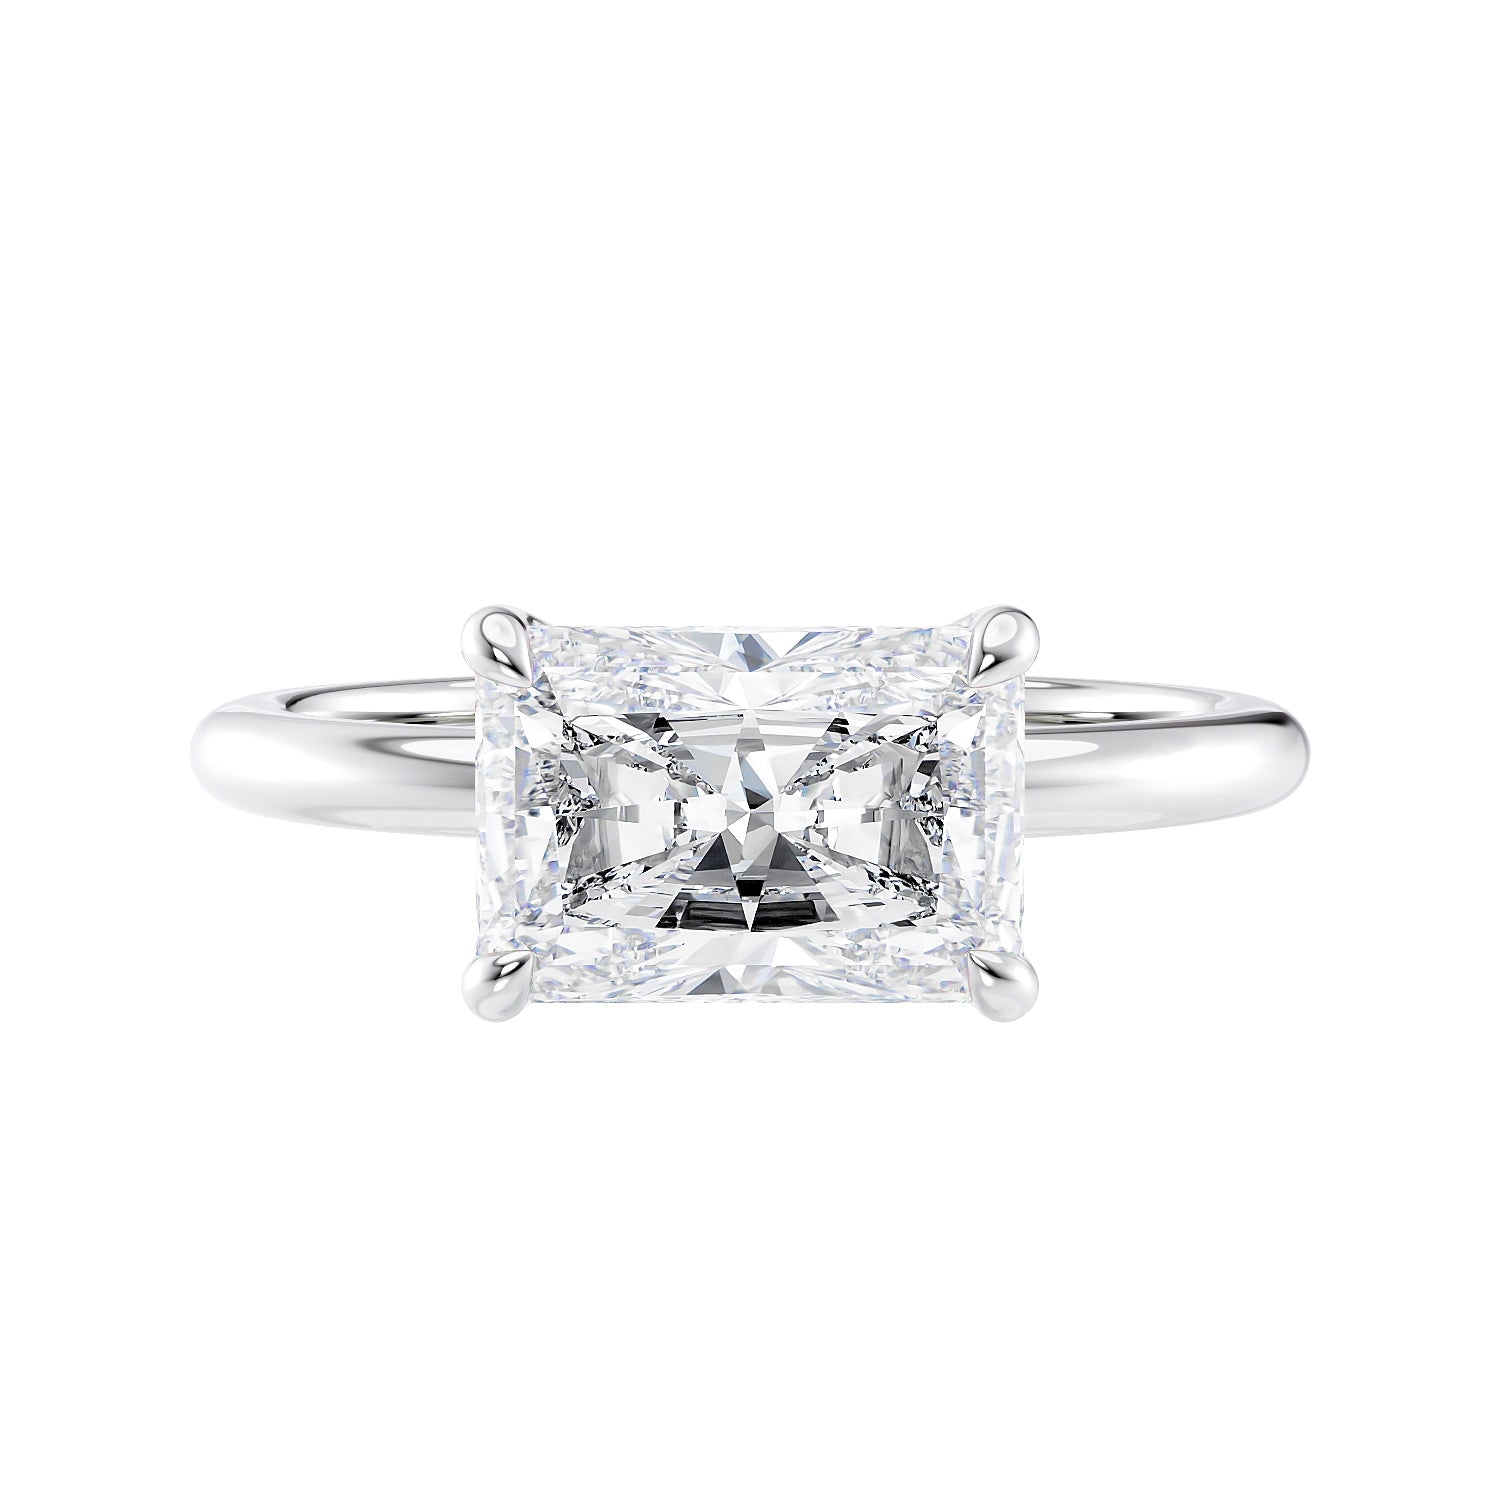 Radiant cut natural diamond engagement ring white gold front view.